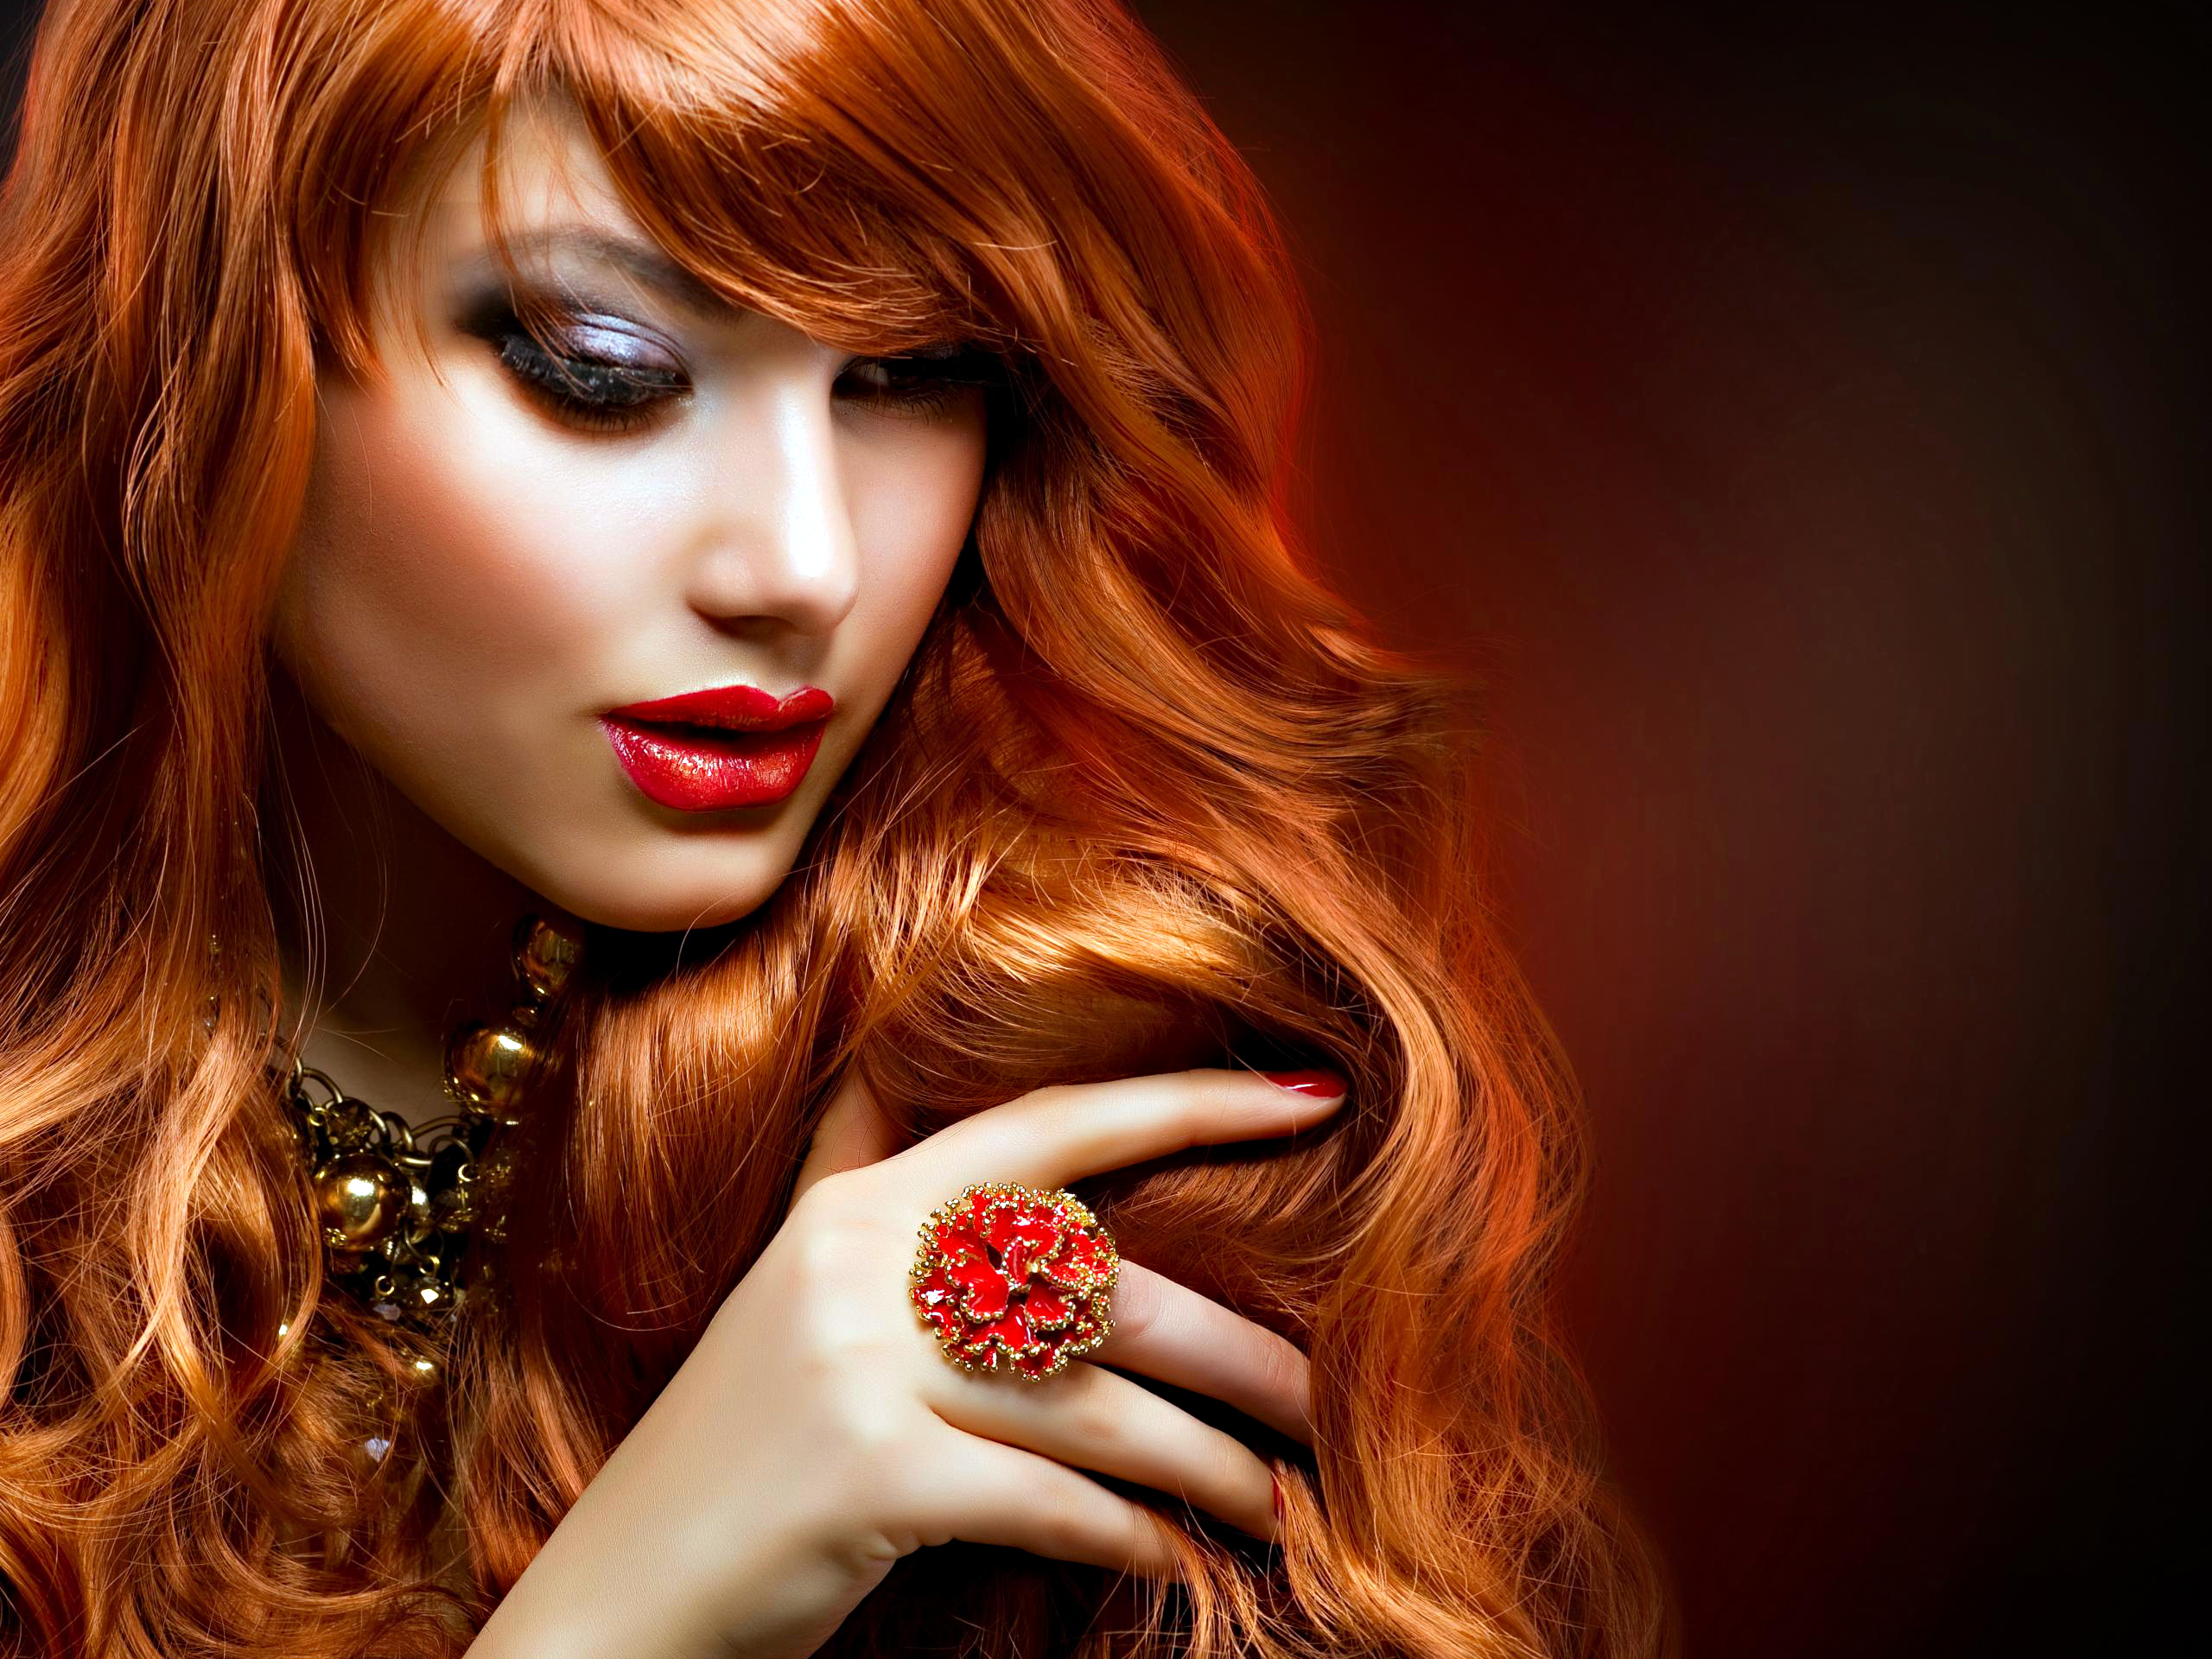 beauty parlour images wallpaper,hair,red hair,hair coloring,lip,red